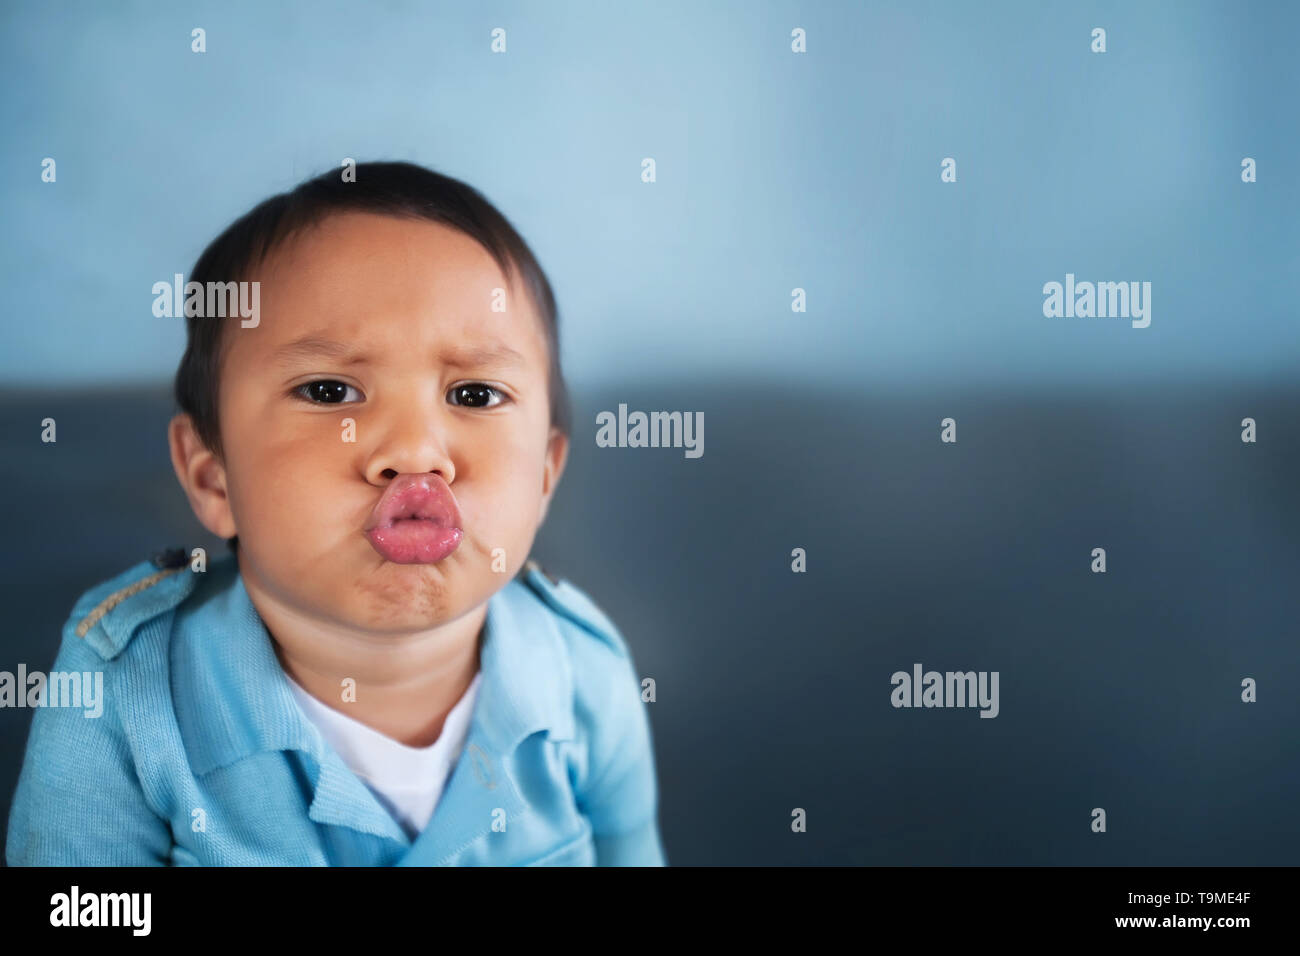 Young boy puckering up his lips to give a kiss and wearing a light blue vintage shirt. Stock Photo